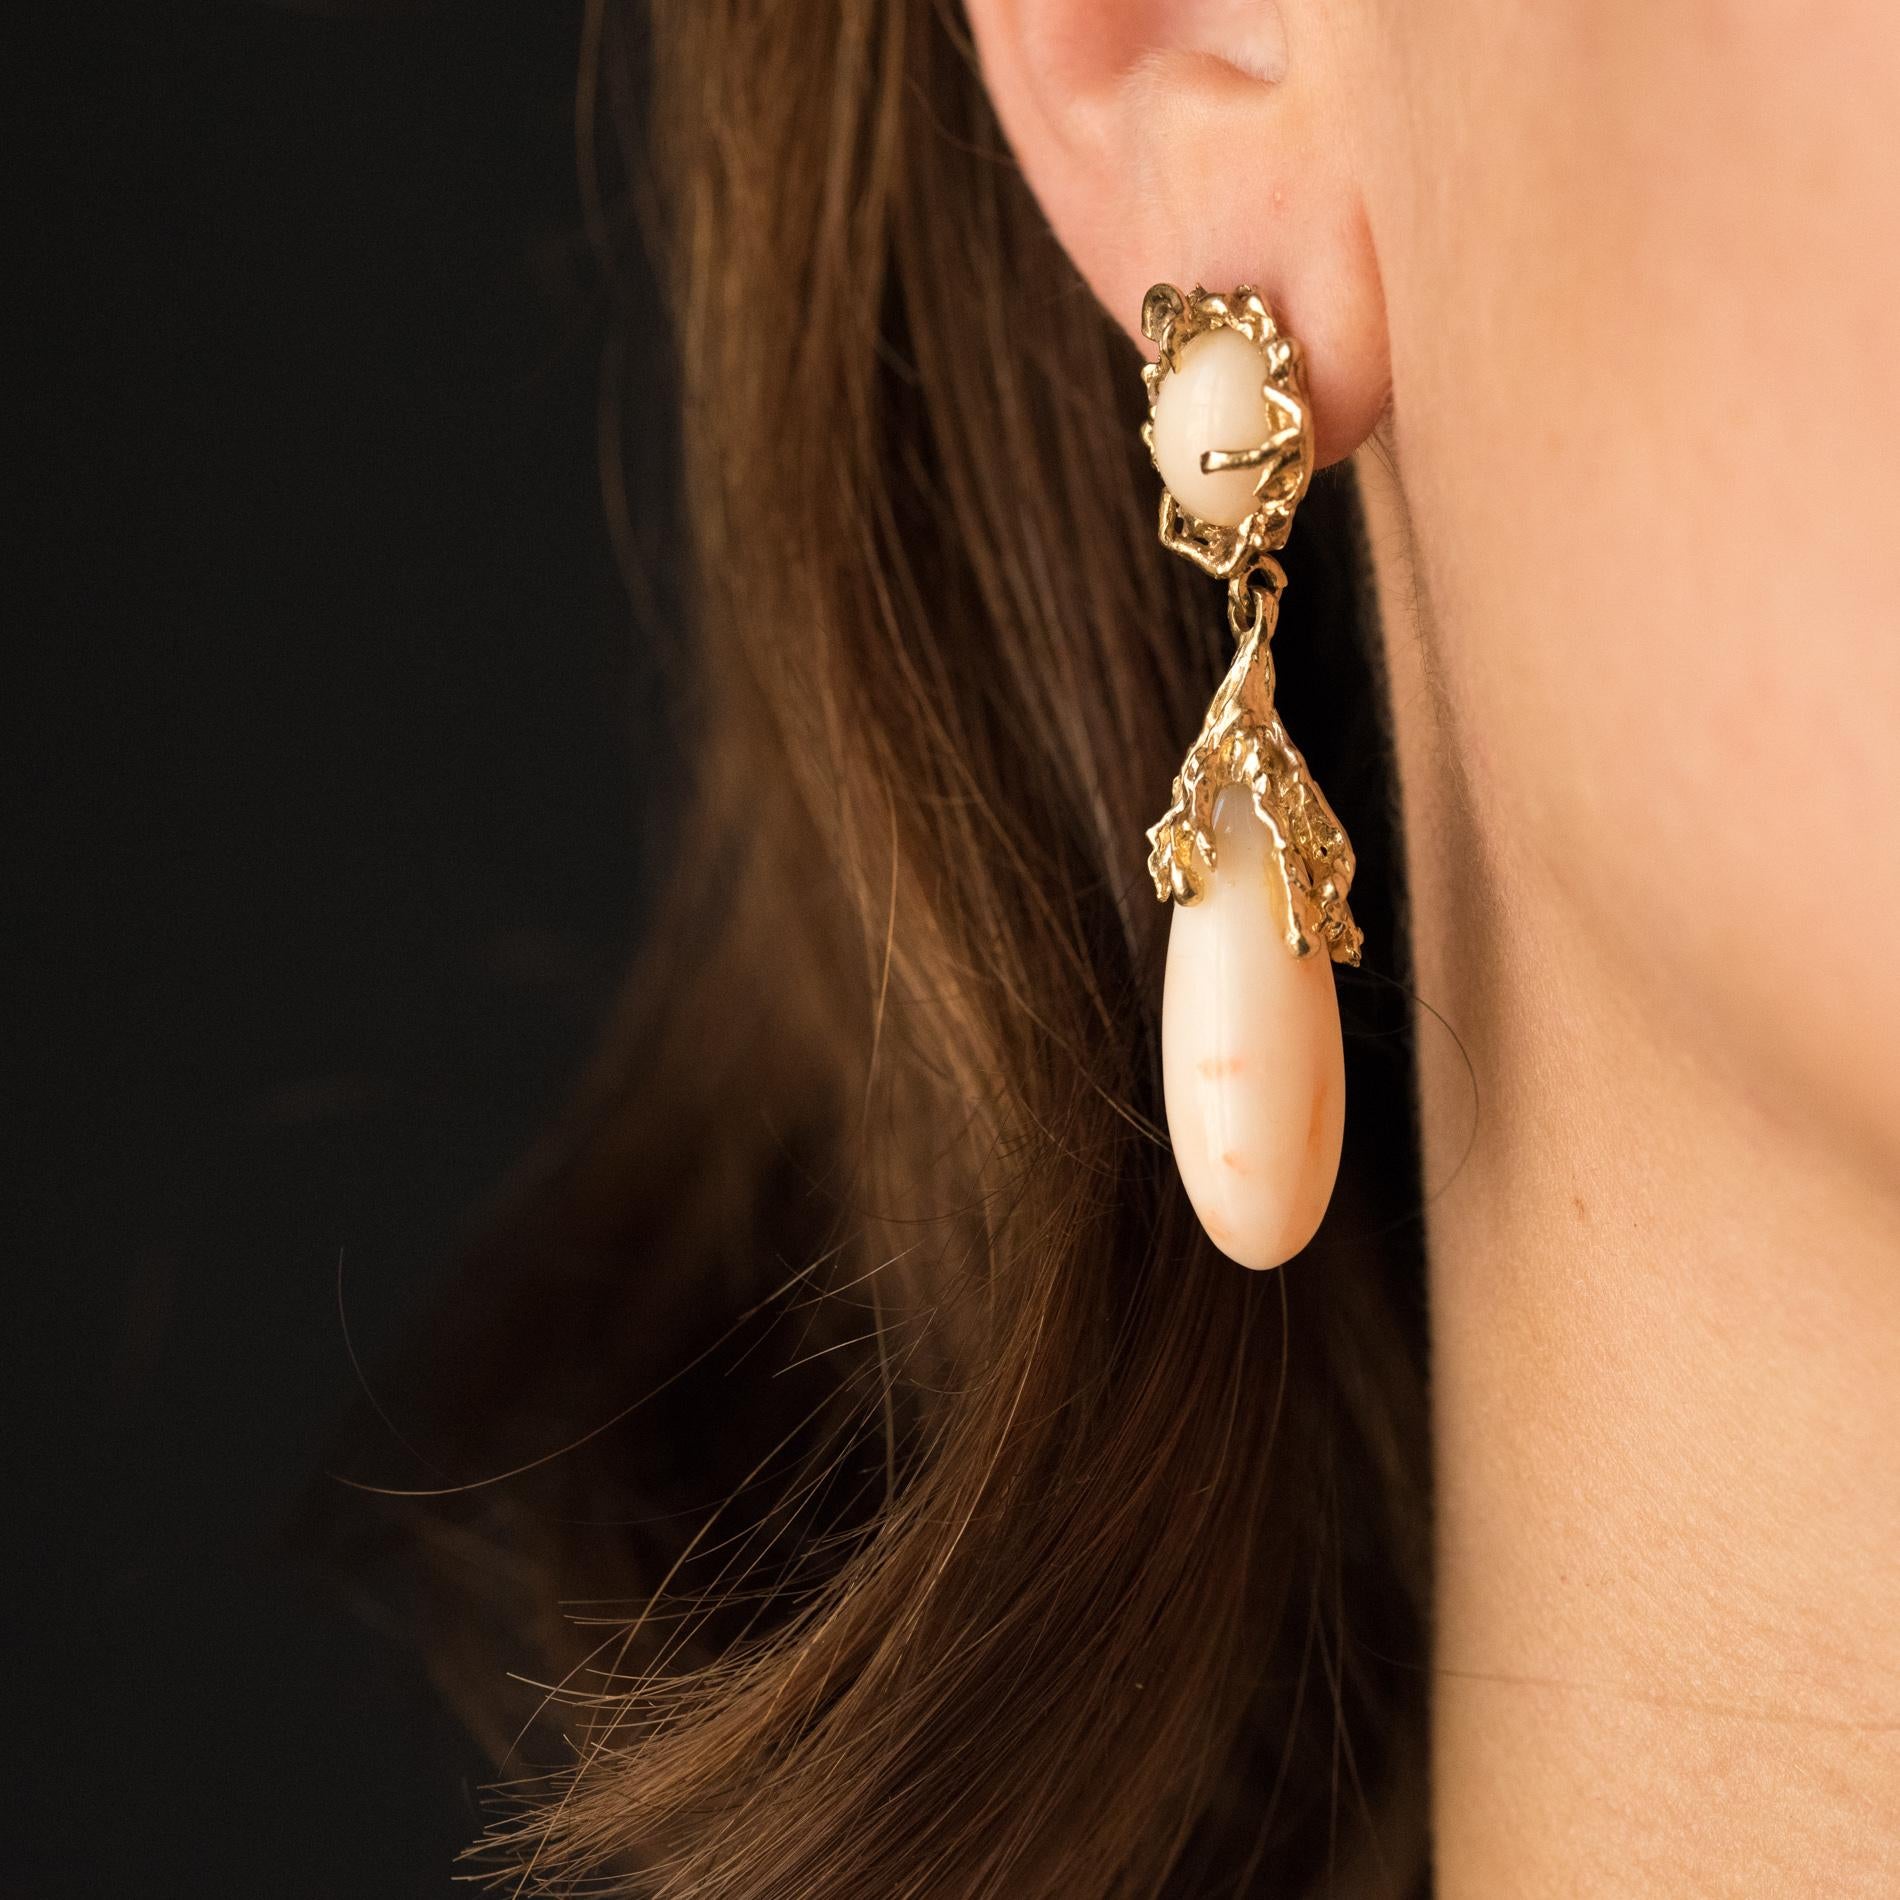 For pierced ears.
Earrings in 14 Karats yellow gold.
These splendid earrings with asymmetrical lines are set with claws of a angel skin coral cabochon in a gnarled decor, chiseled, like a branch that set the gem. As a tassel, a drop of angel skin